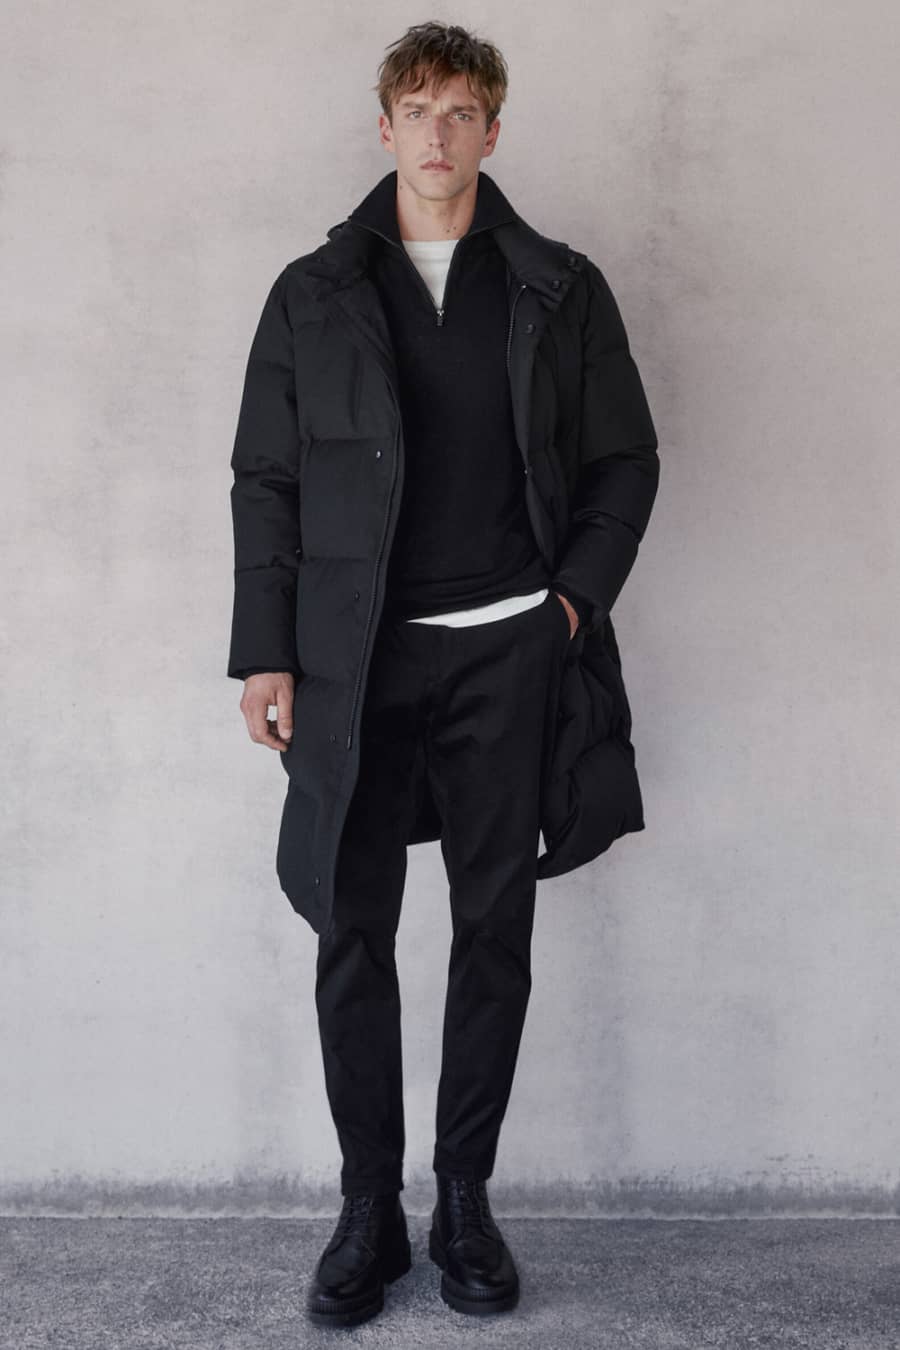 Men's black jeans, white T-shirt, black funnel neck sweater, black puffer jacket and black boots outfit